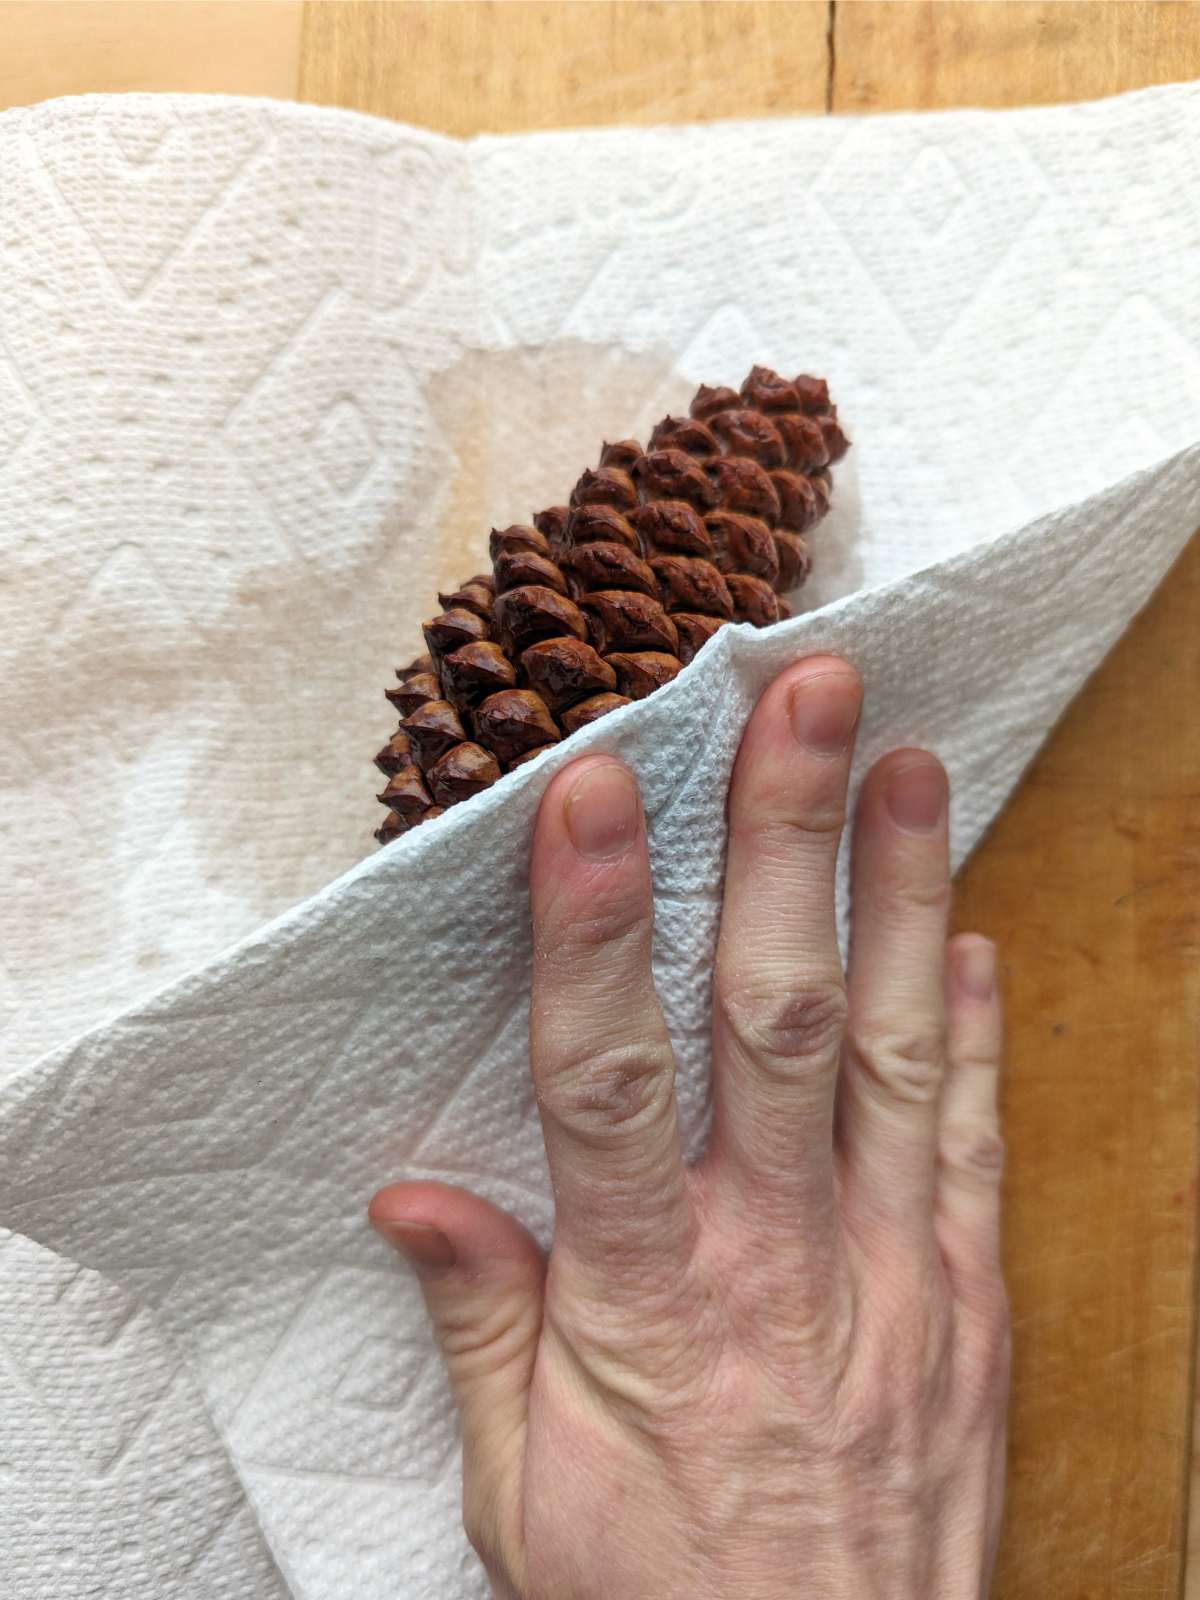 Hand wrapping a paper towel on a wet pinecone that is closed. Wooden background.